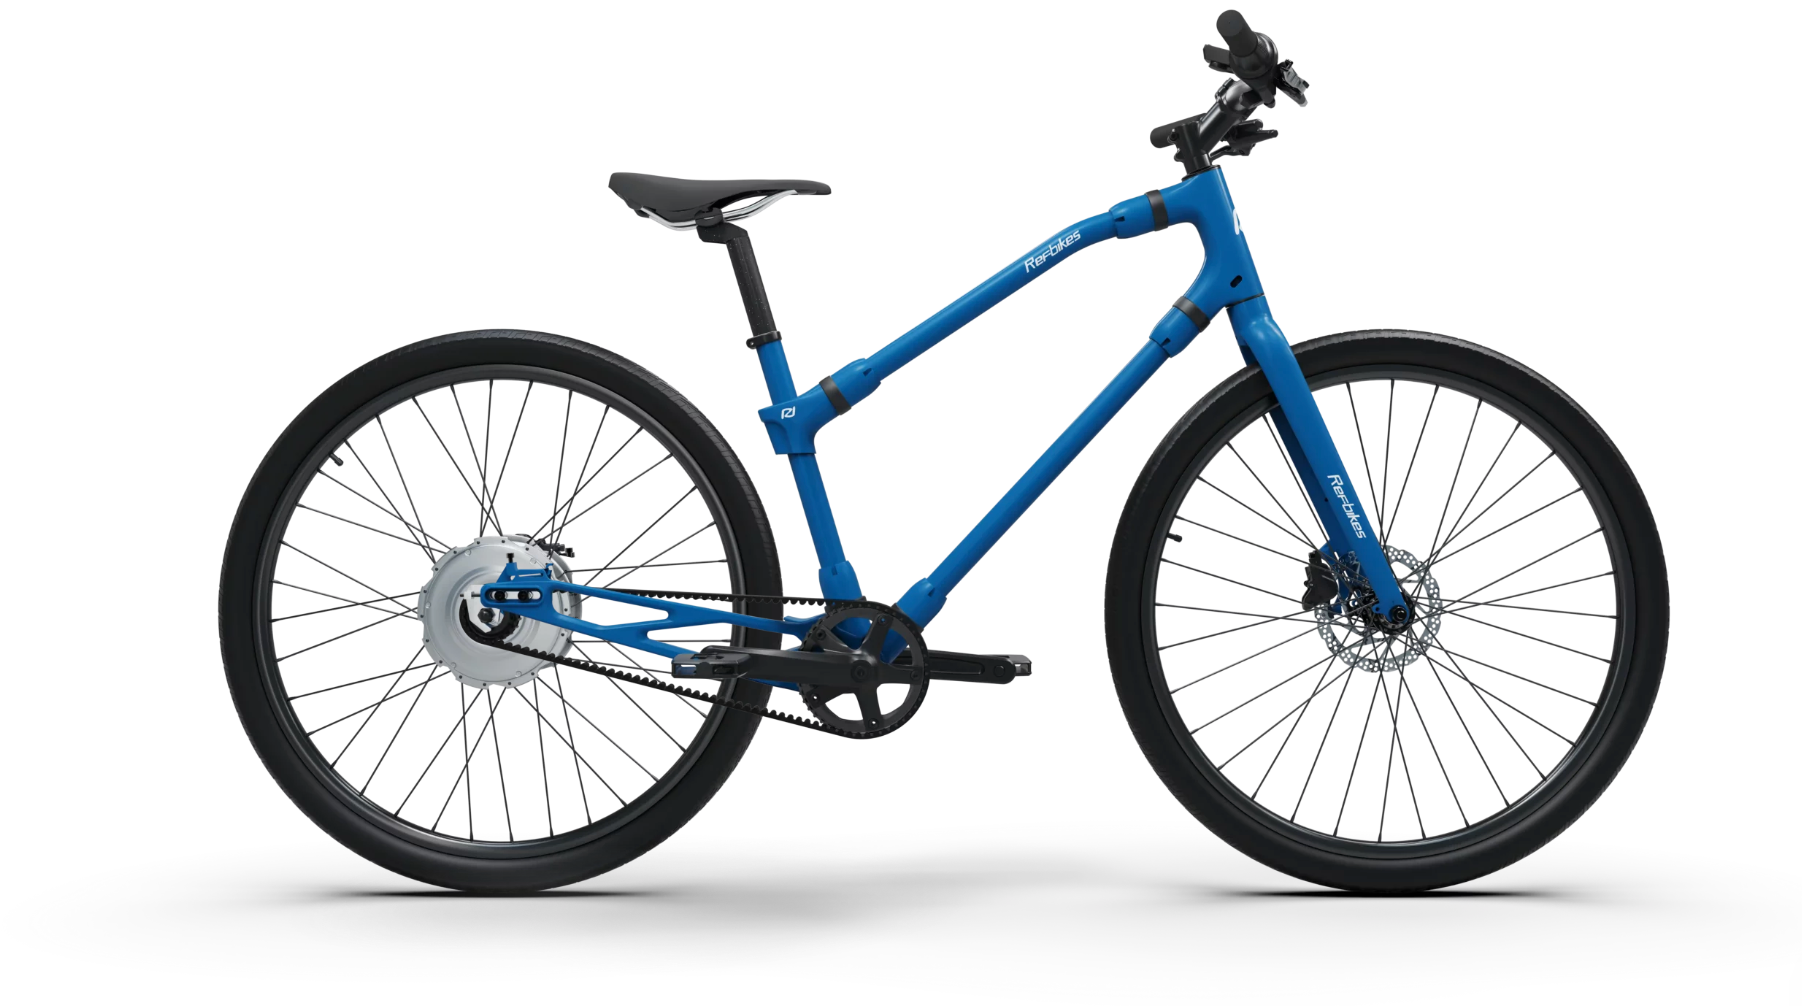 Royal blue Essential Boost bike with a durable build and elegant design.